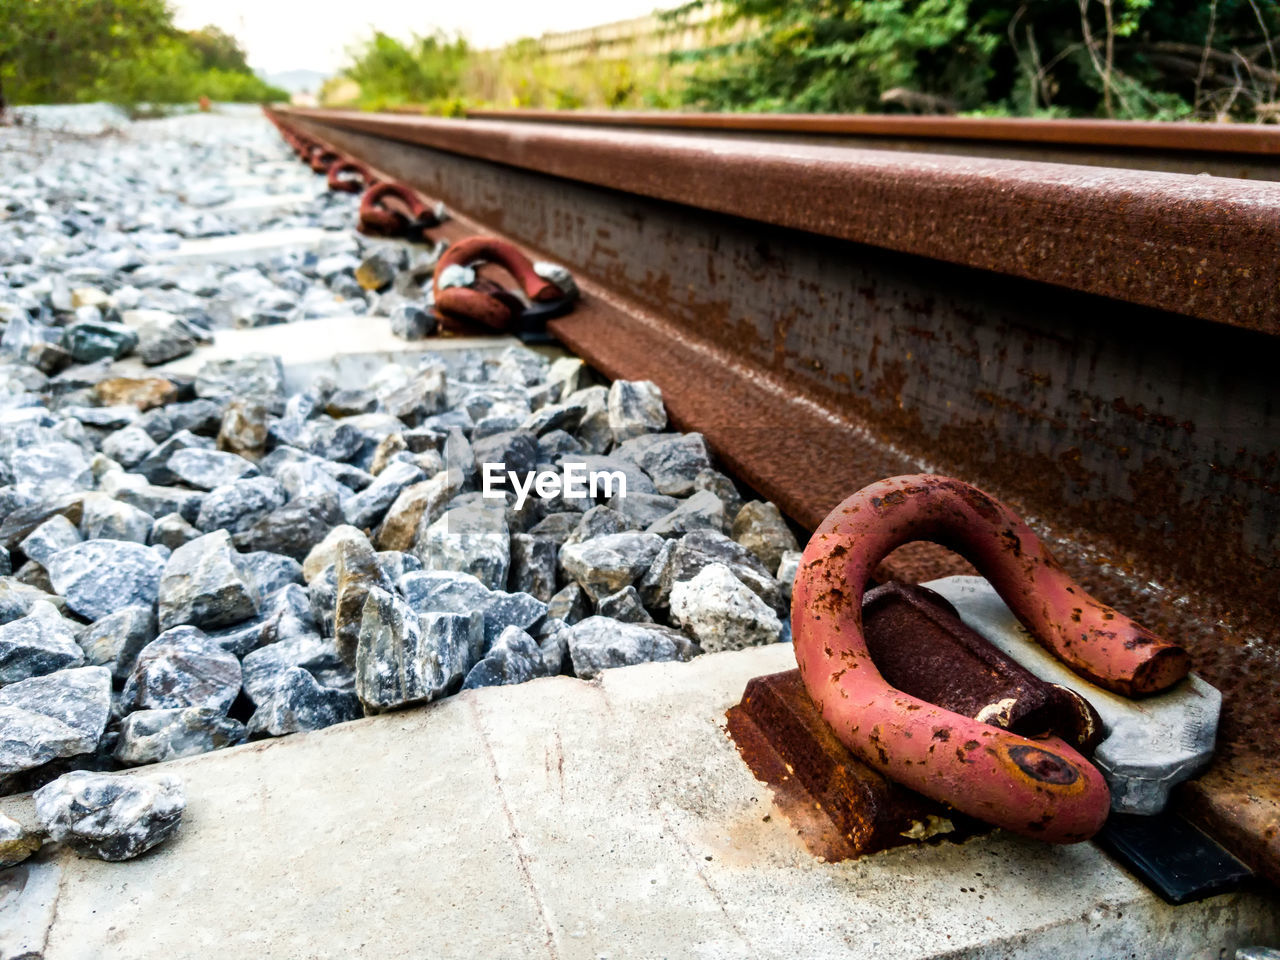 CLOSE-UP OF RUSTY METAL CHAIN ON RAILROAD TRACK